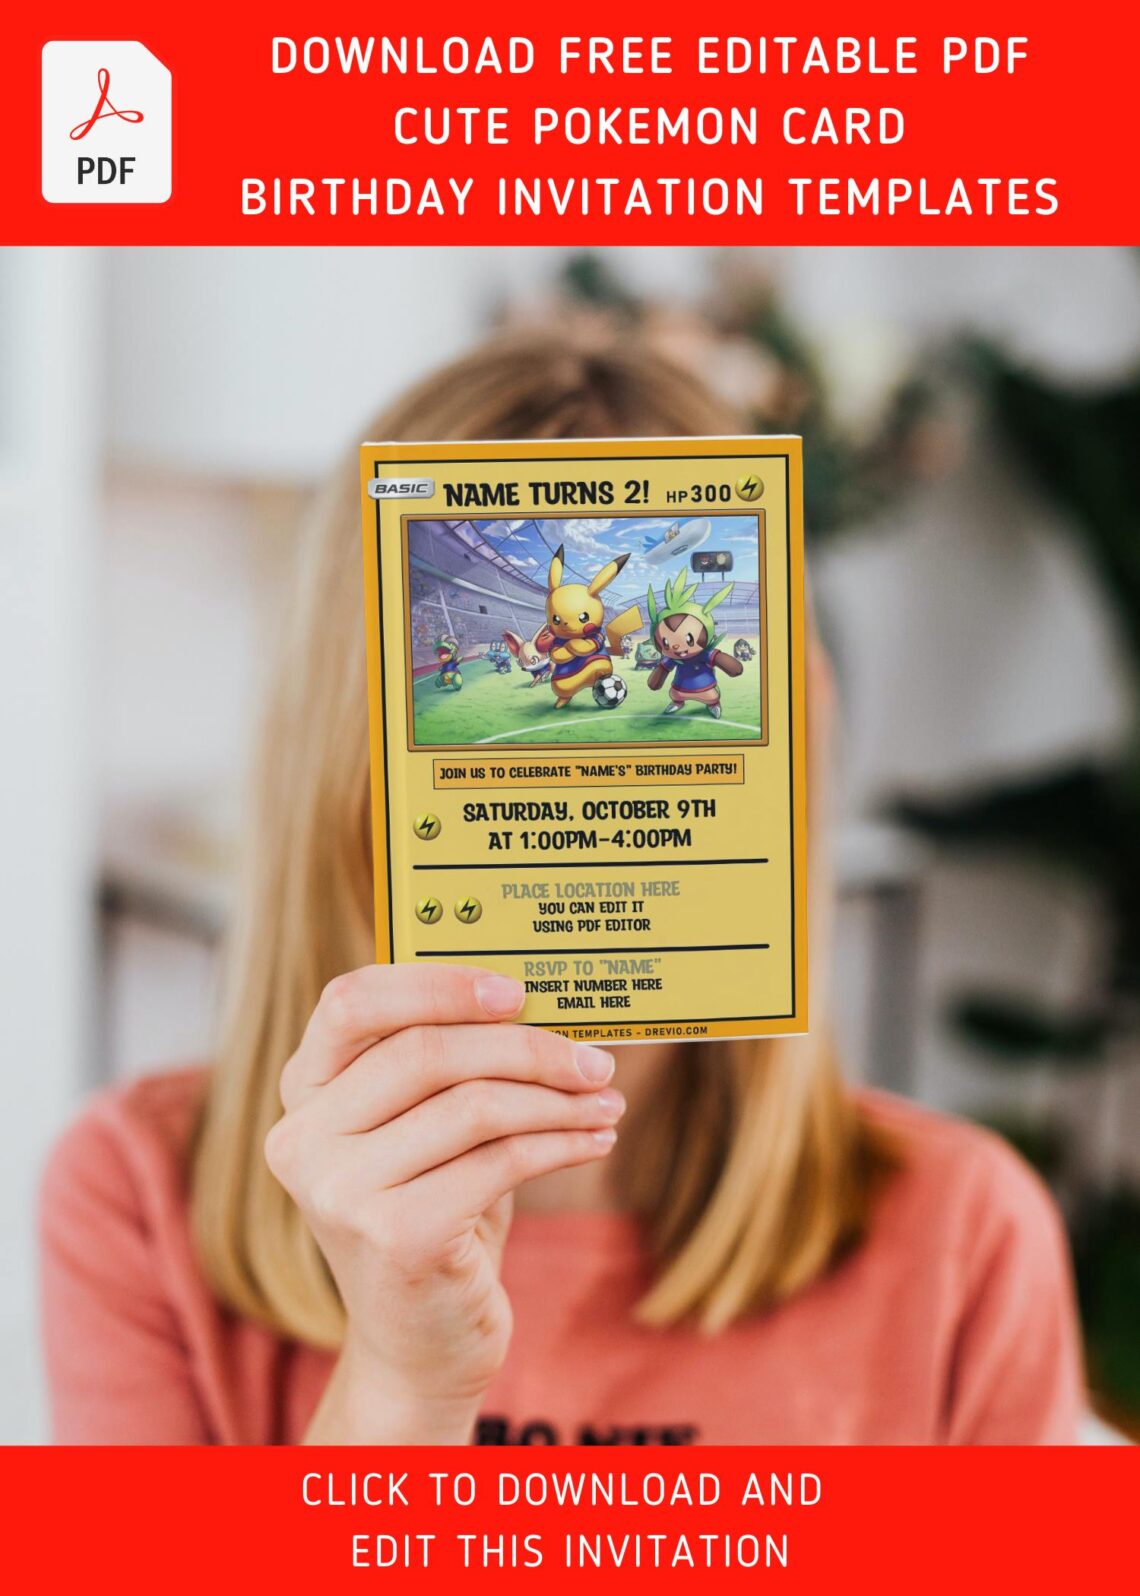 (Free Editable PDF) Cute And Awesome Pokemon Kids Birthday Party Invitation Templates with